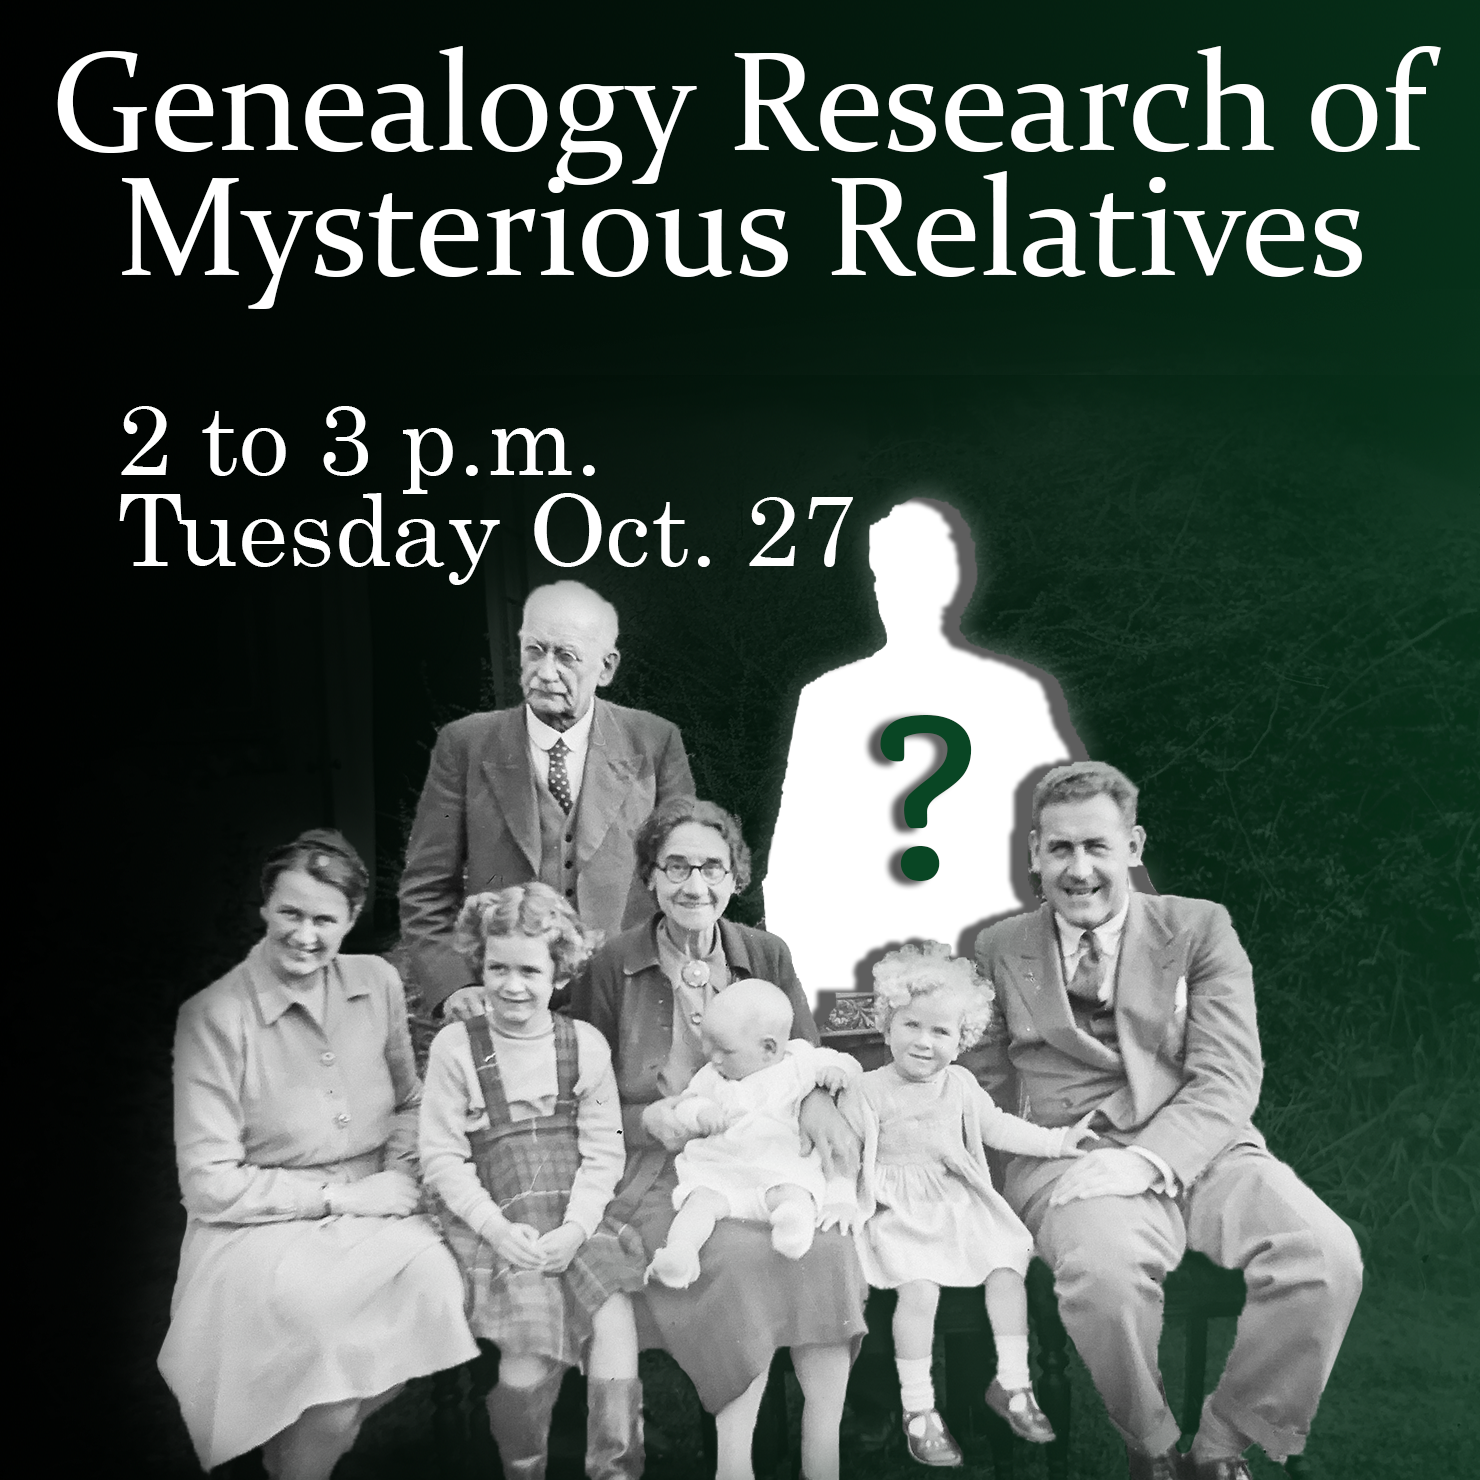 Family photo in black and white with missing person indicated with a question mark. Text: Genealogy Research of Mysterious Relatives, 2 to 3 p.m. Tuesday Oct. 27.